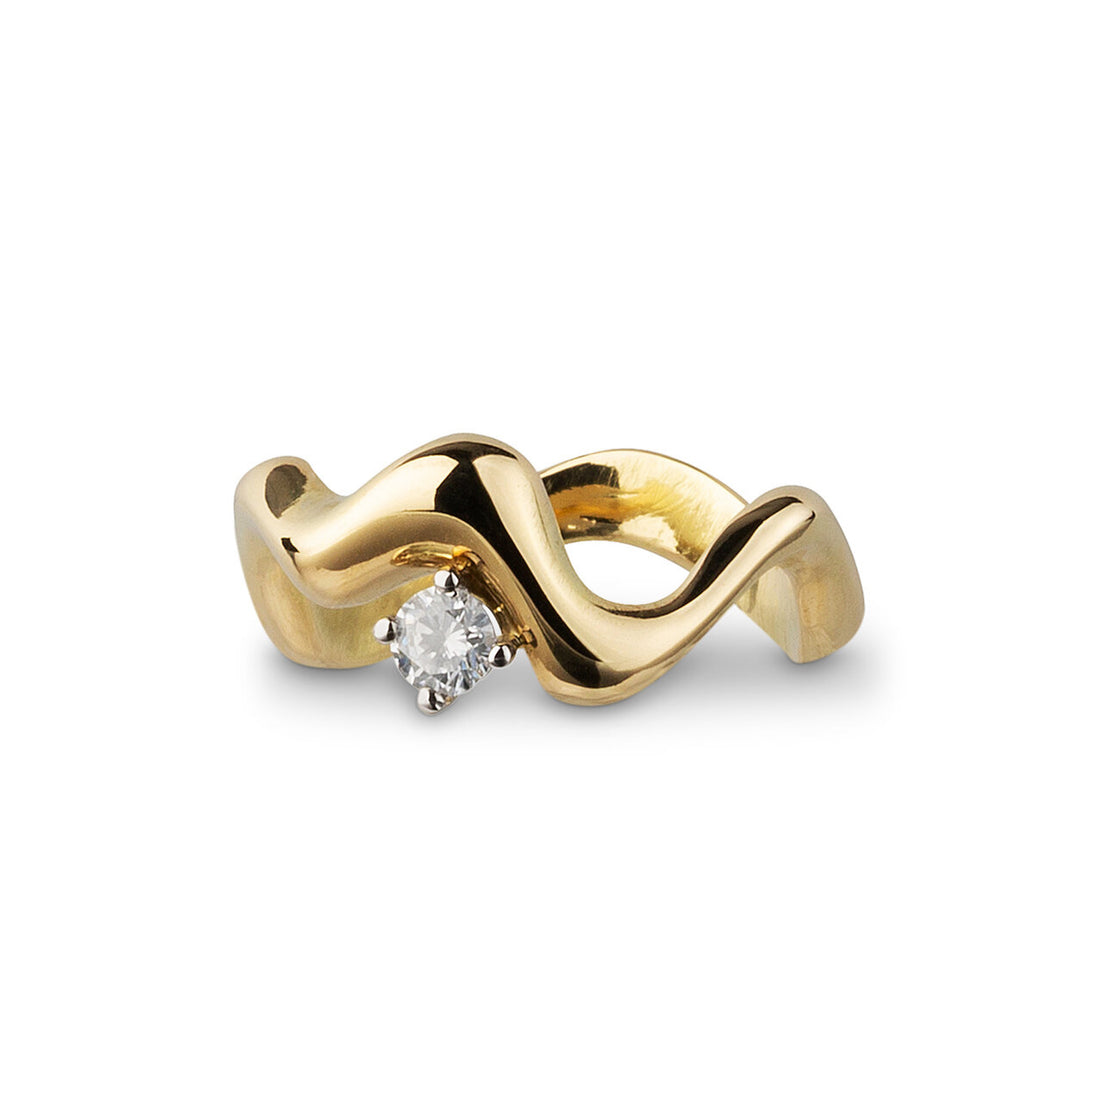  Sculptural Gold Ring with Floating Diamond by Jessie Thomas | The Cut London